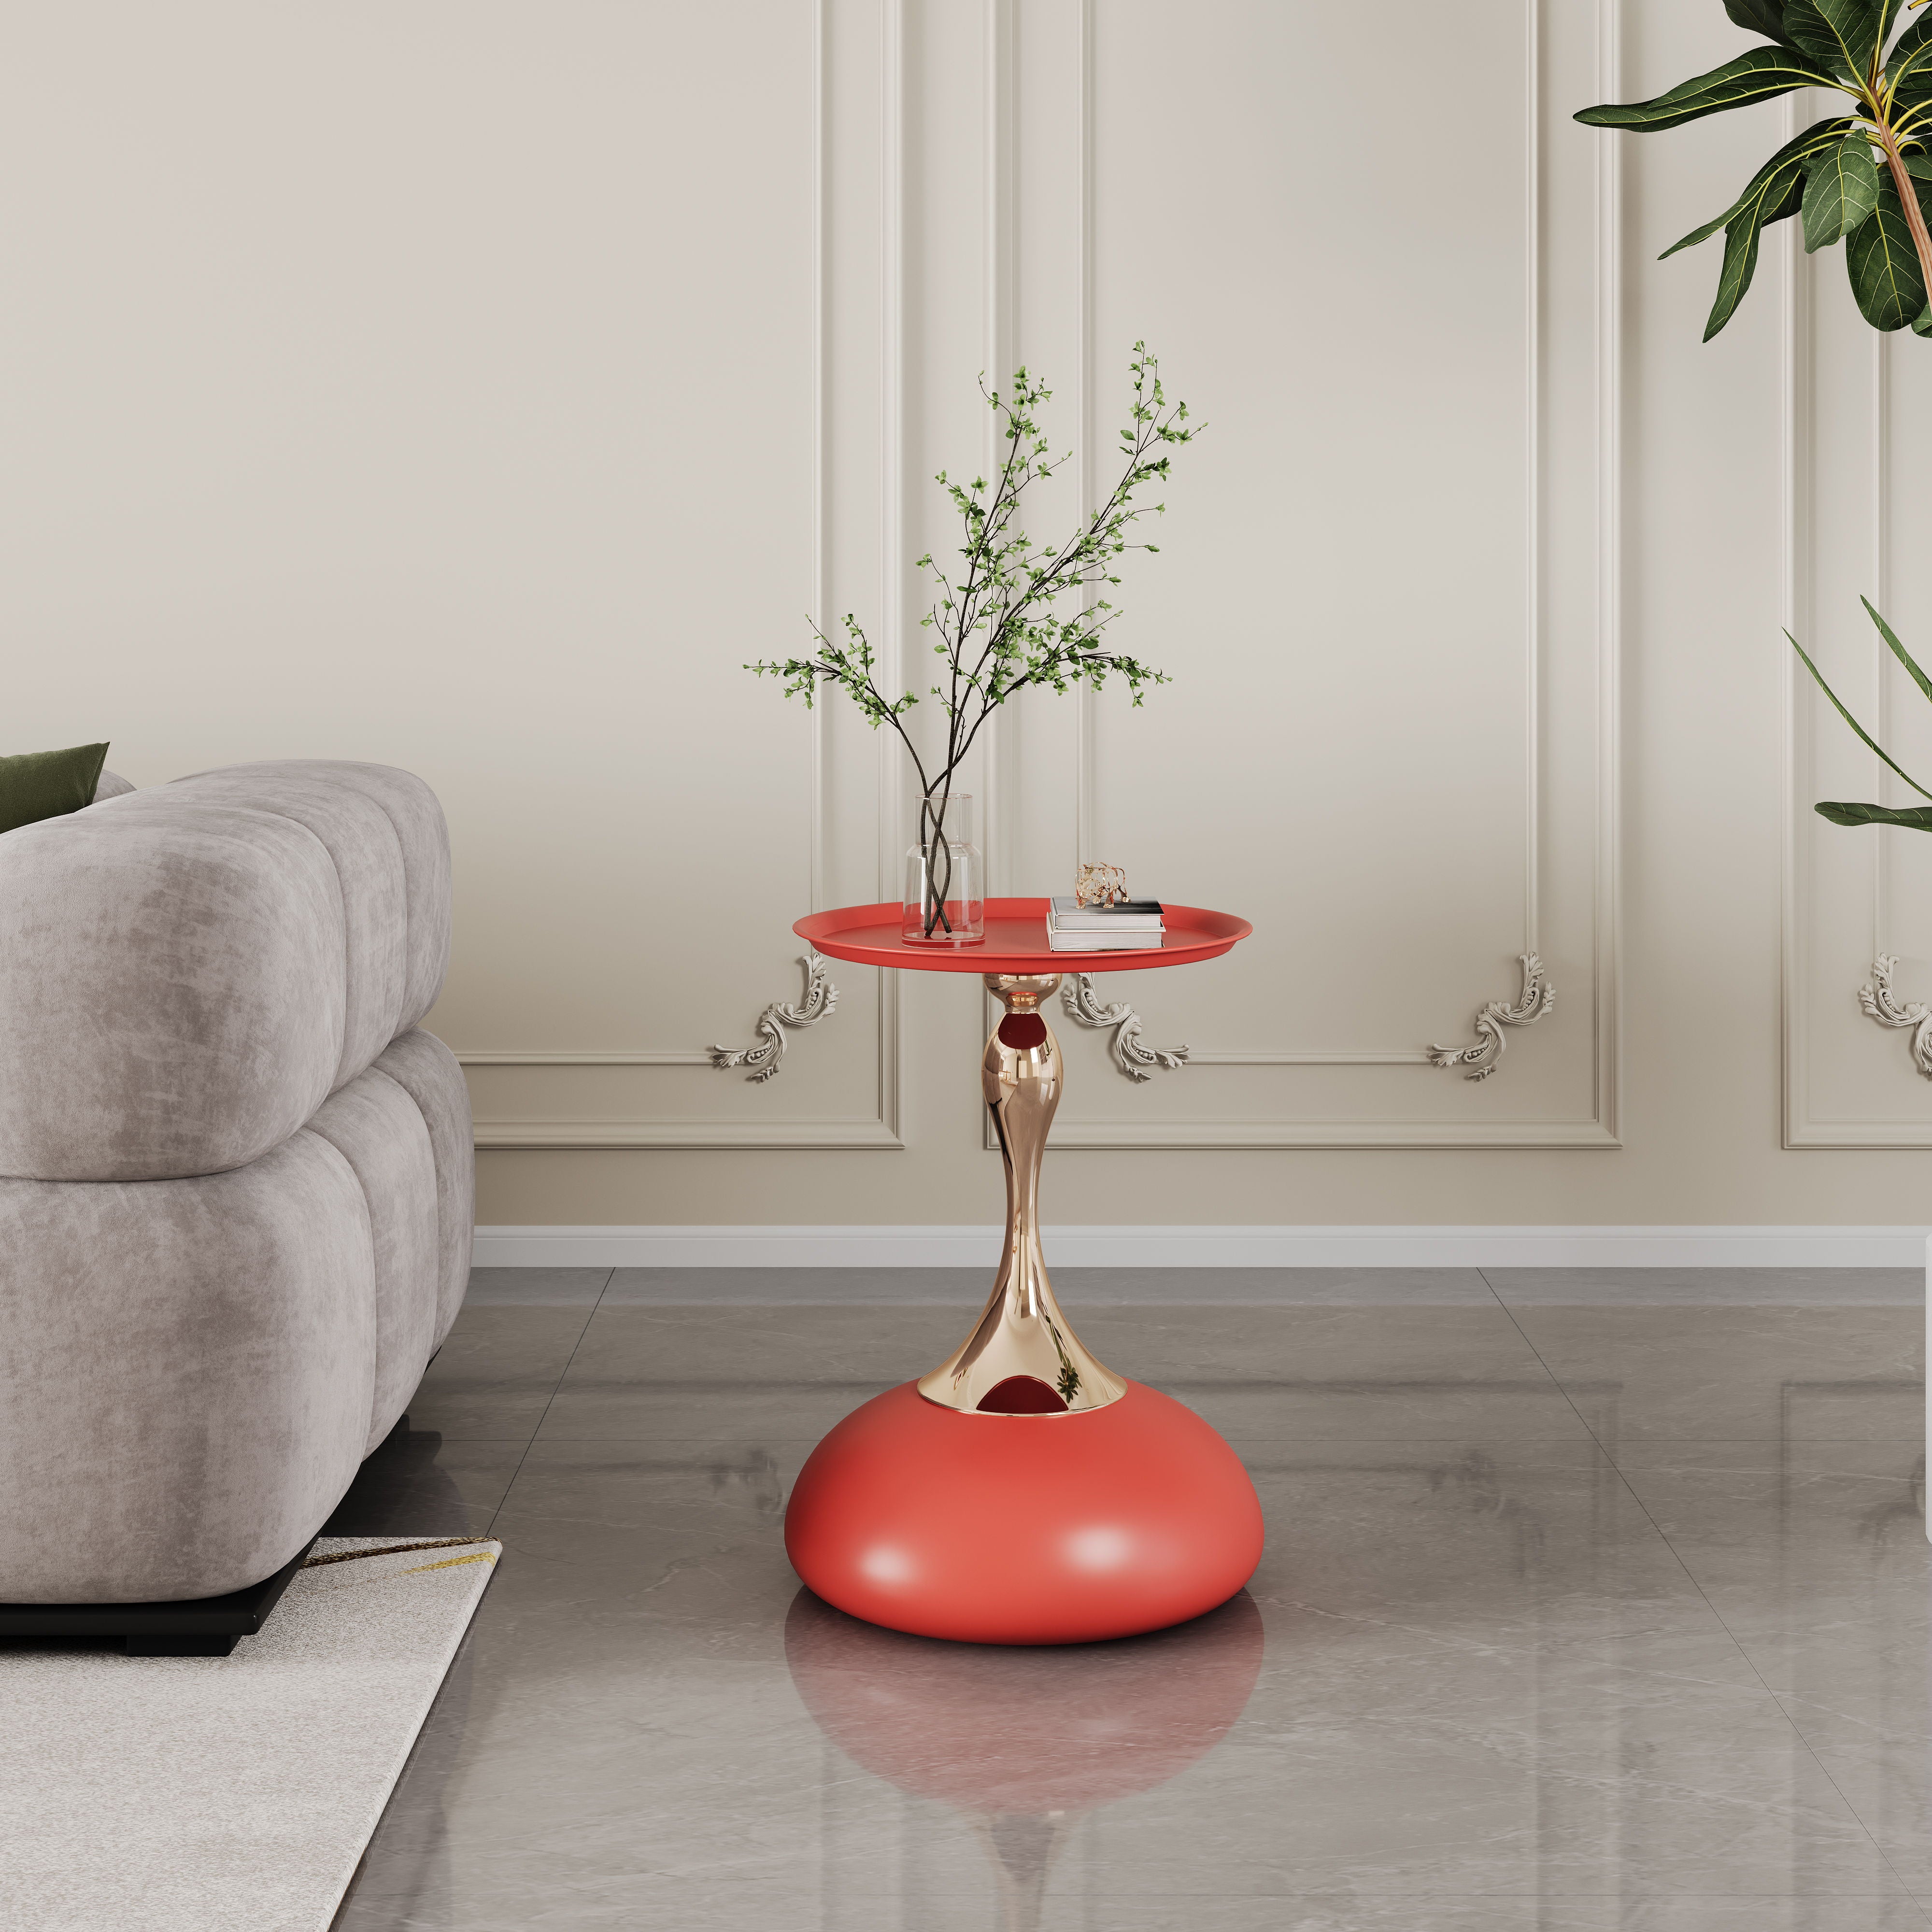 Luxury Design Iron End Table, Minimalist Round Side Table For Small Space - Red